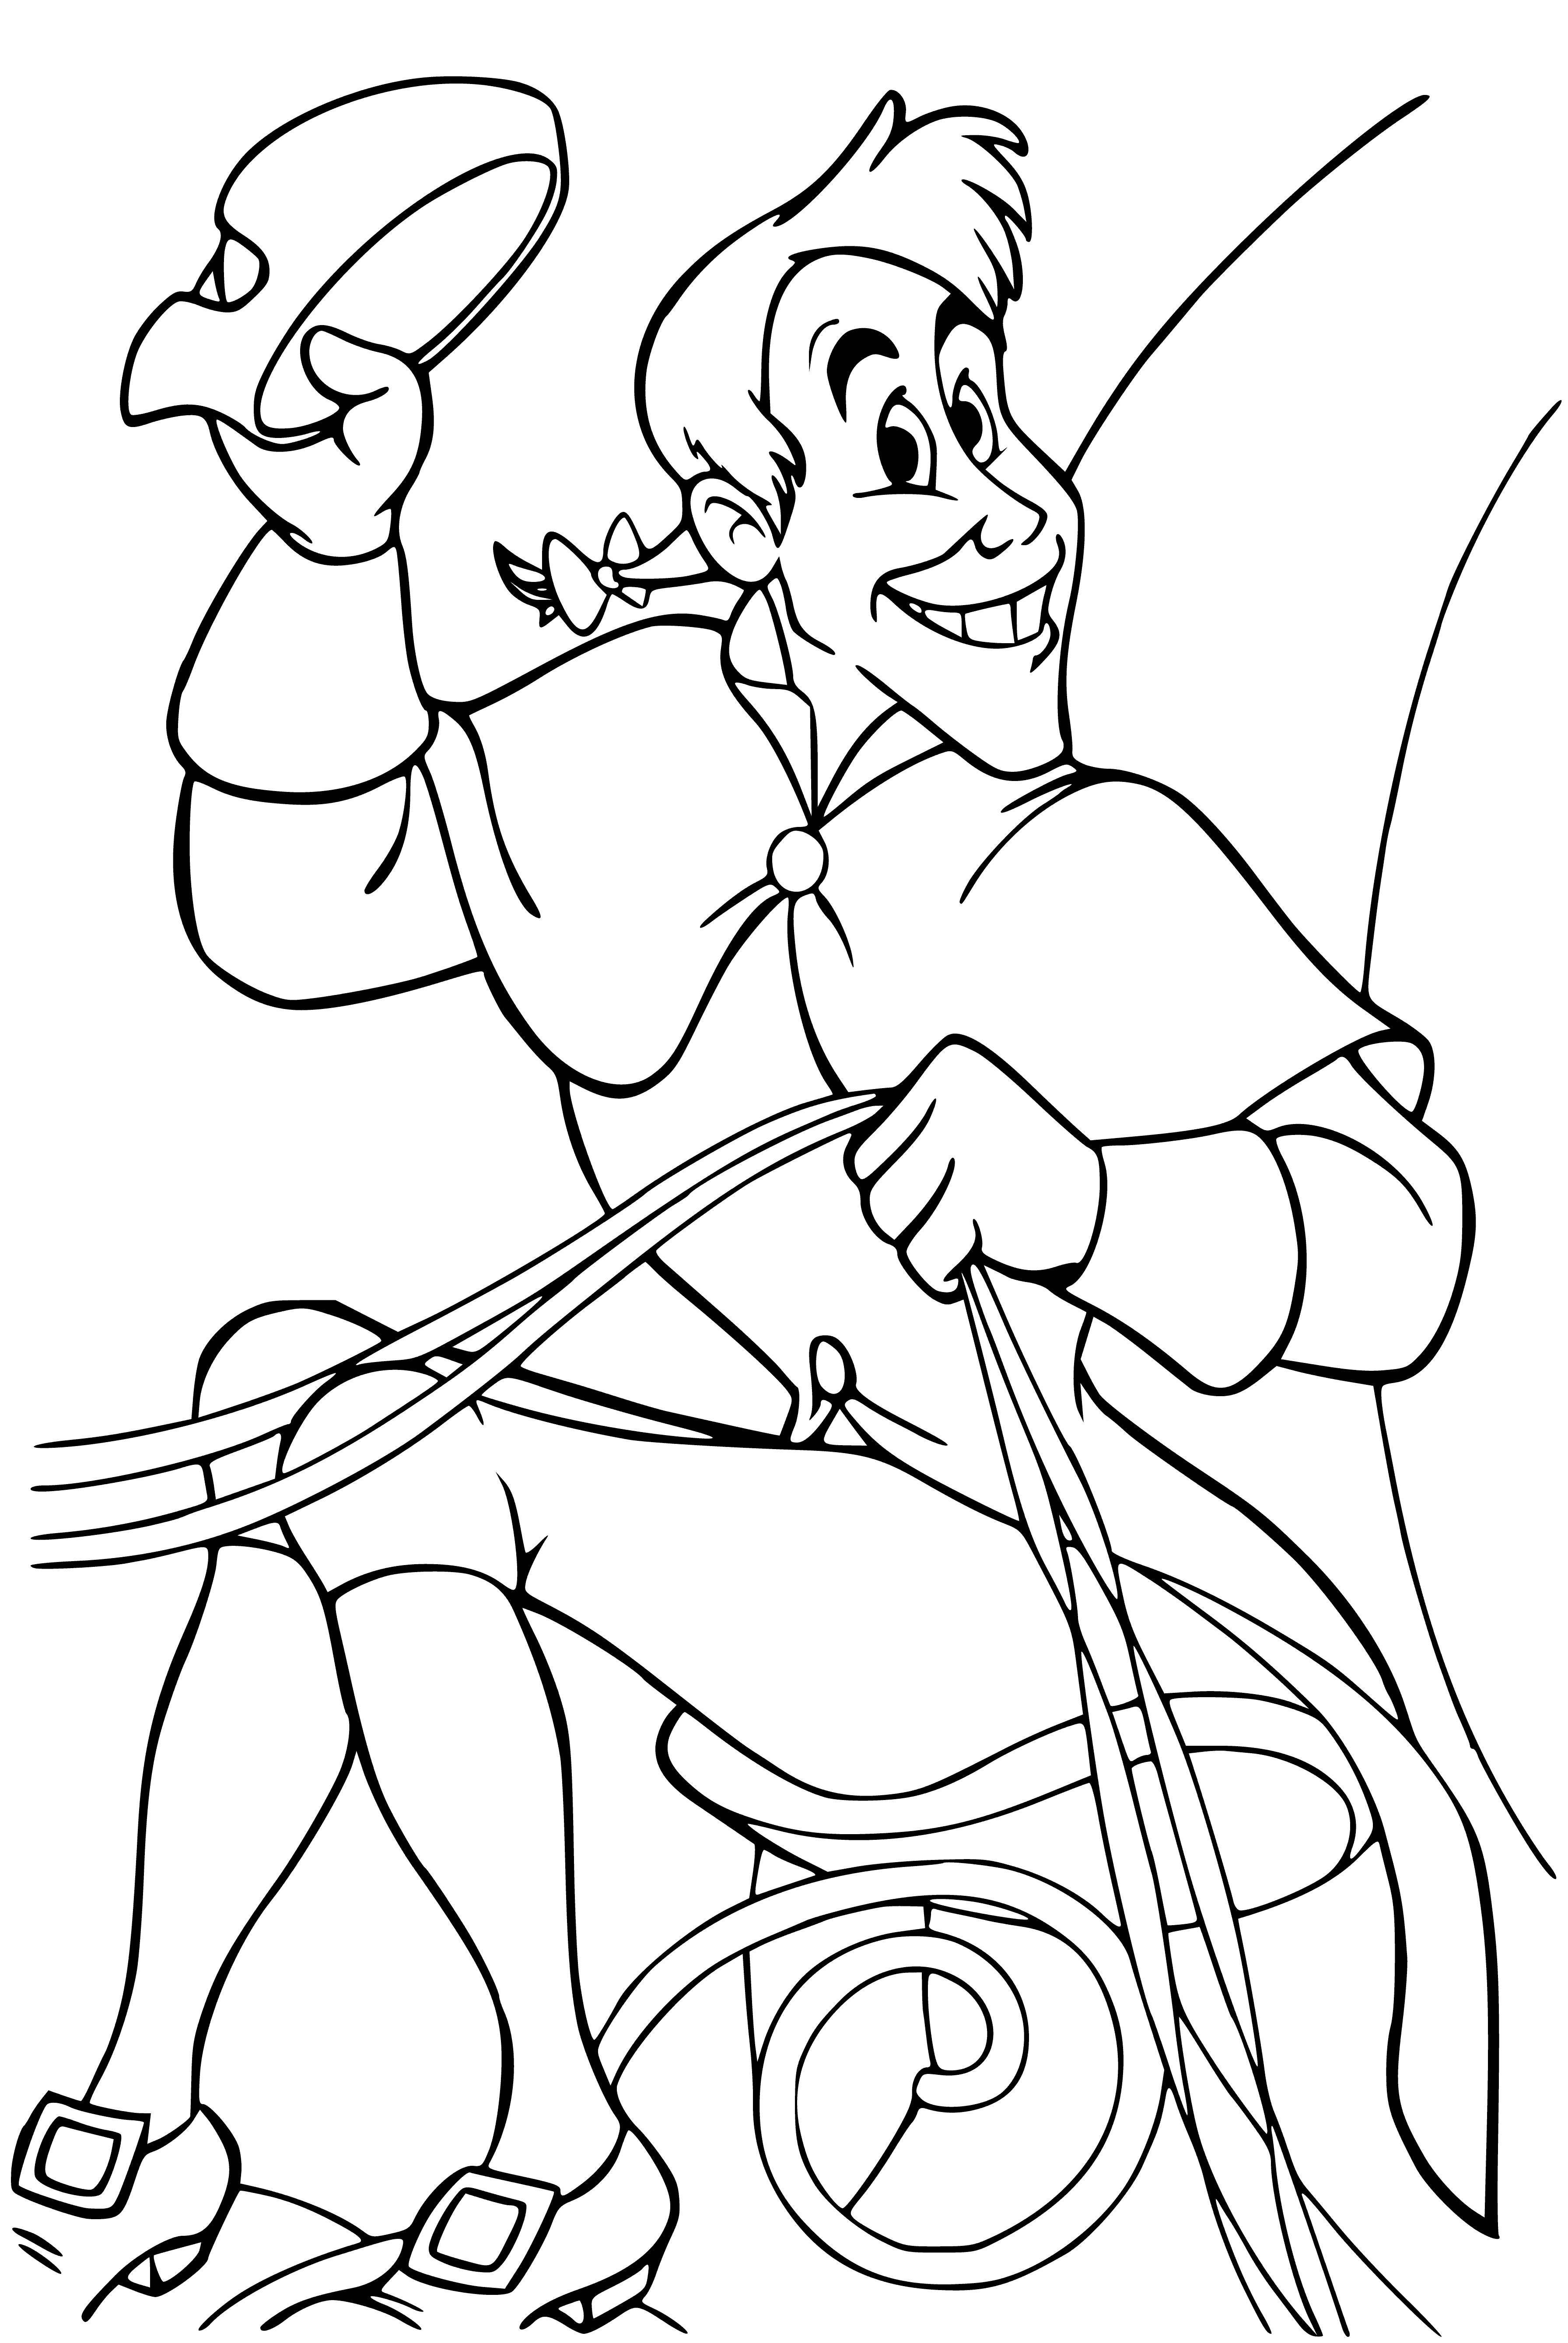 coloring page: Cinderella transforms into a coachman with a whip and hat in the coloring page.